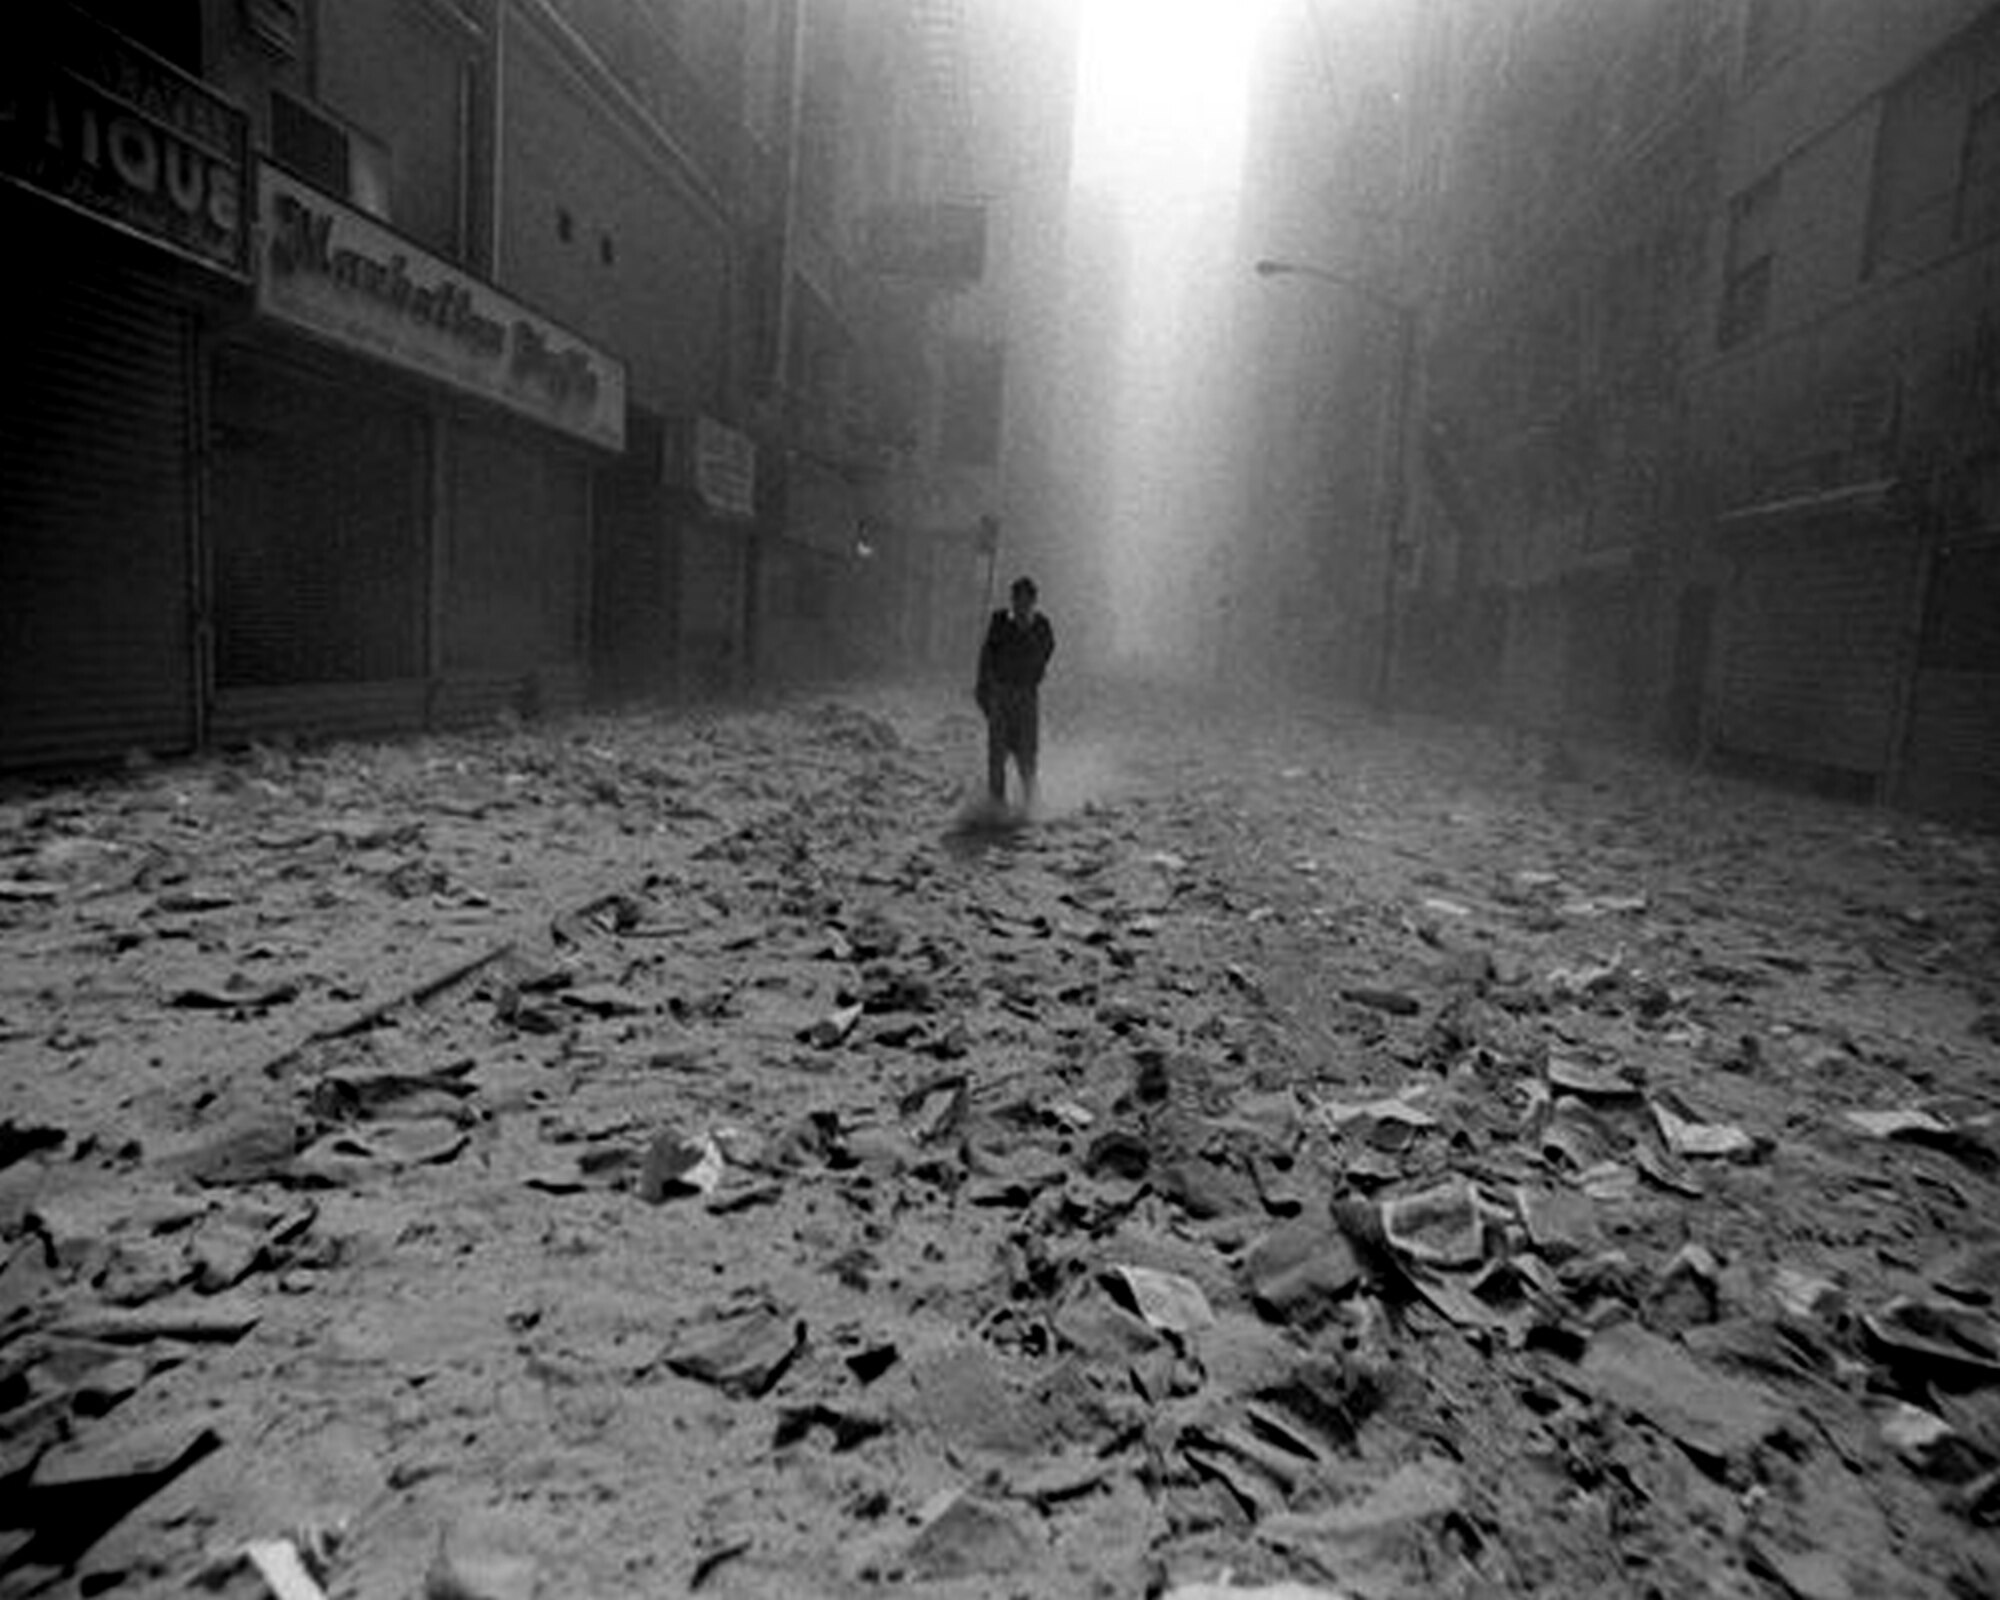 A lone person stands on a New York City Street after the World Trade Center collapse, Sept. 11, 2001. Practically the entire city of Manhattan was covered in a thick cloud of dust and ash as a result of the tower collapse. (Corbis photo by Jason Florio/Released)